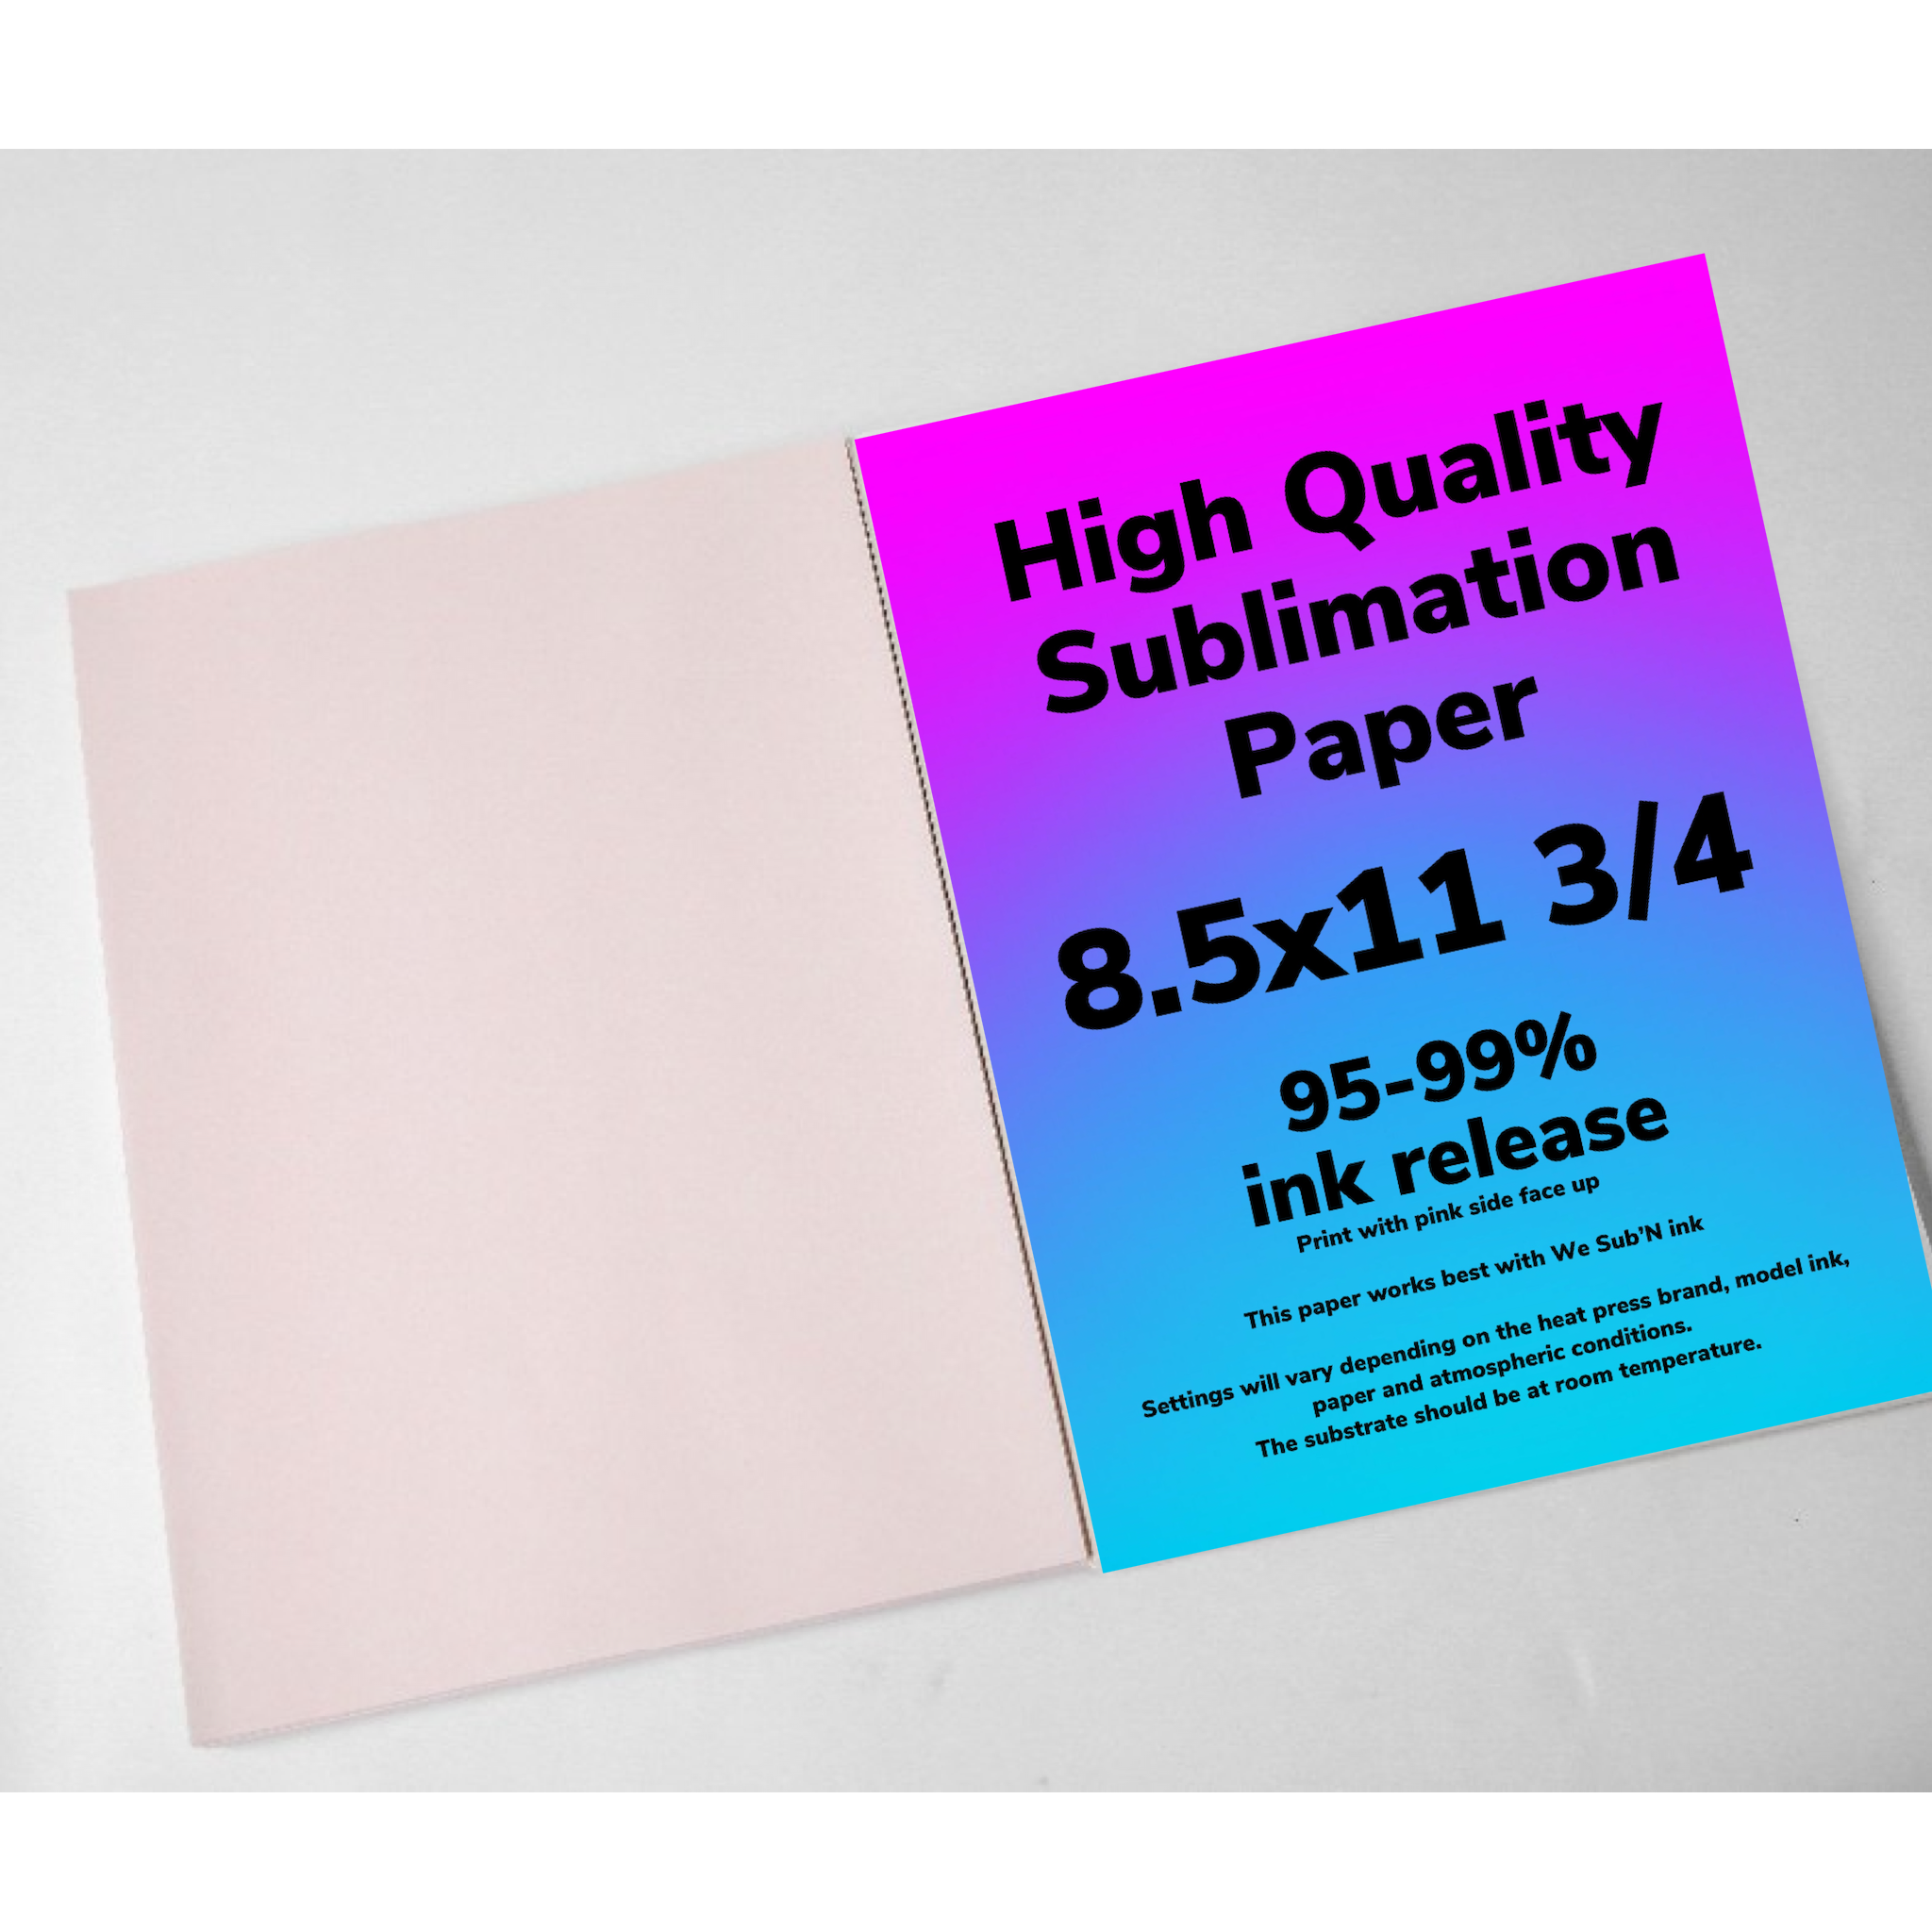 Makerflo Sublimation Paper (8.5x11, inches)